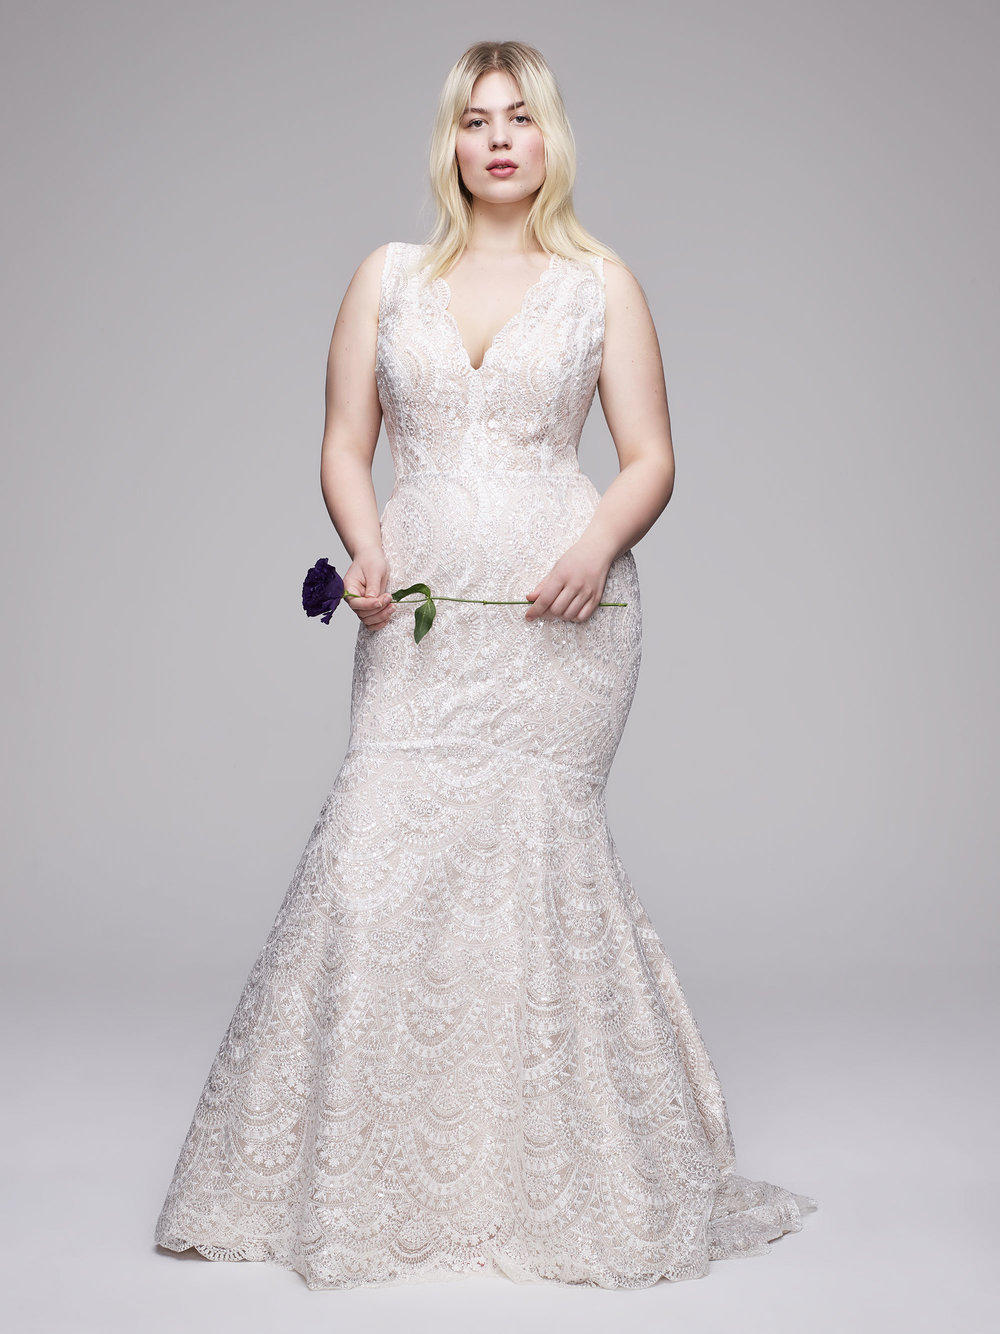 The Renzo Plus Size Wedding Dress from Curve Couture by Anne Barge